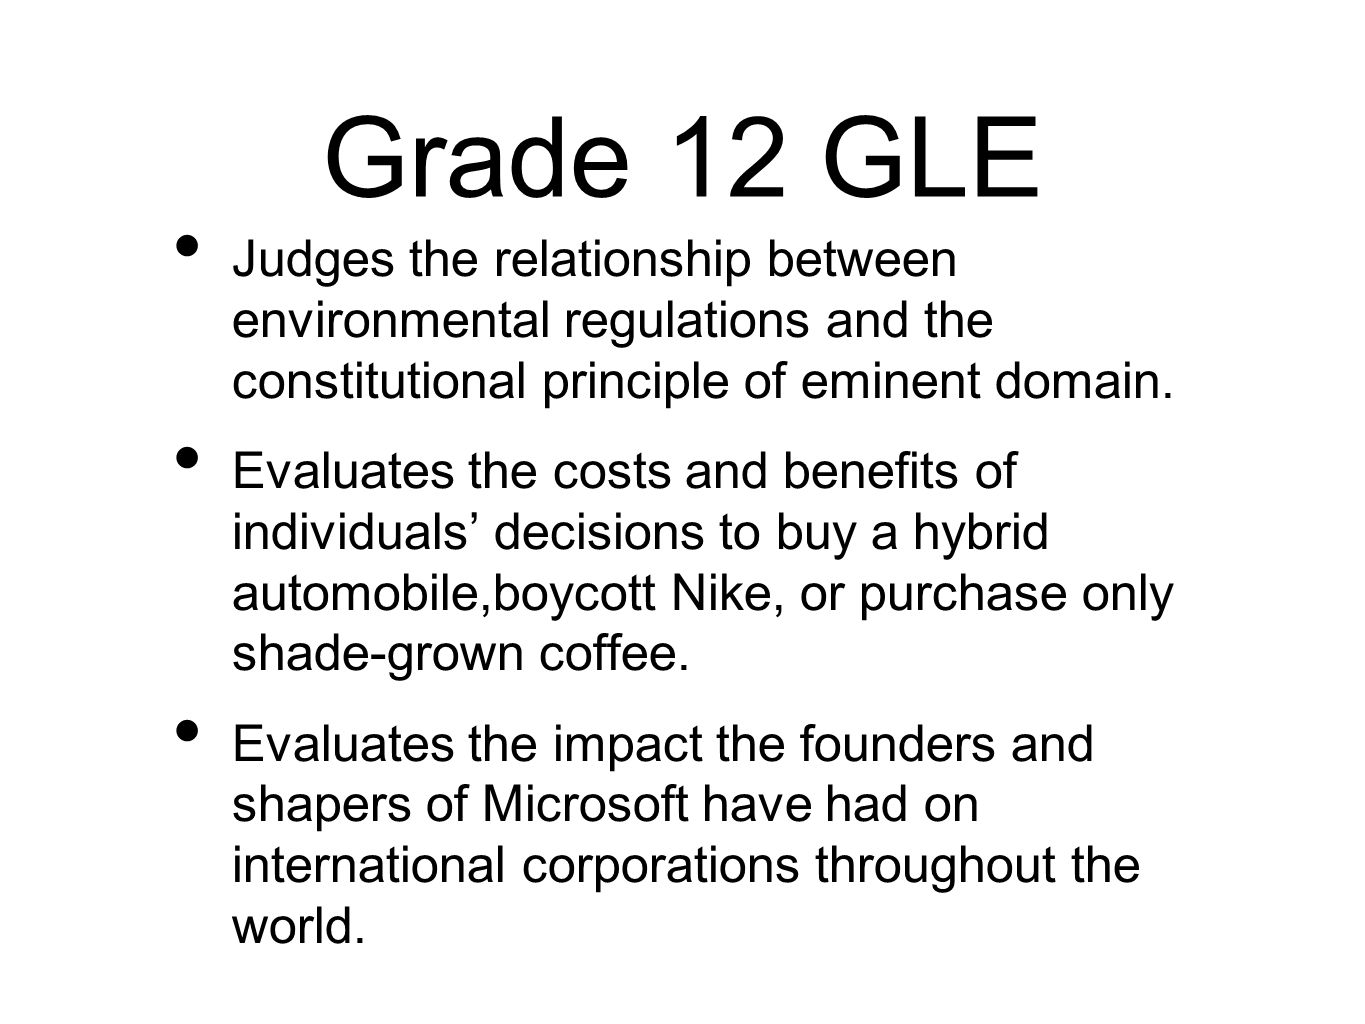 Grade 12 GLE Judges the relationship between environmental regulations and the constitutional principle of eminent domain.